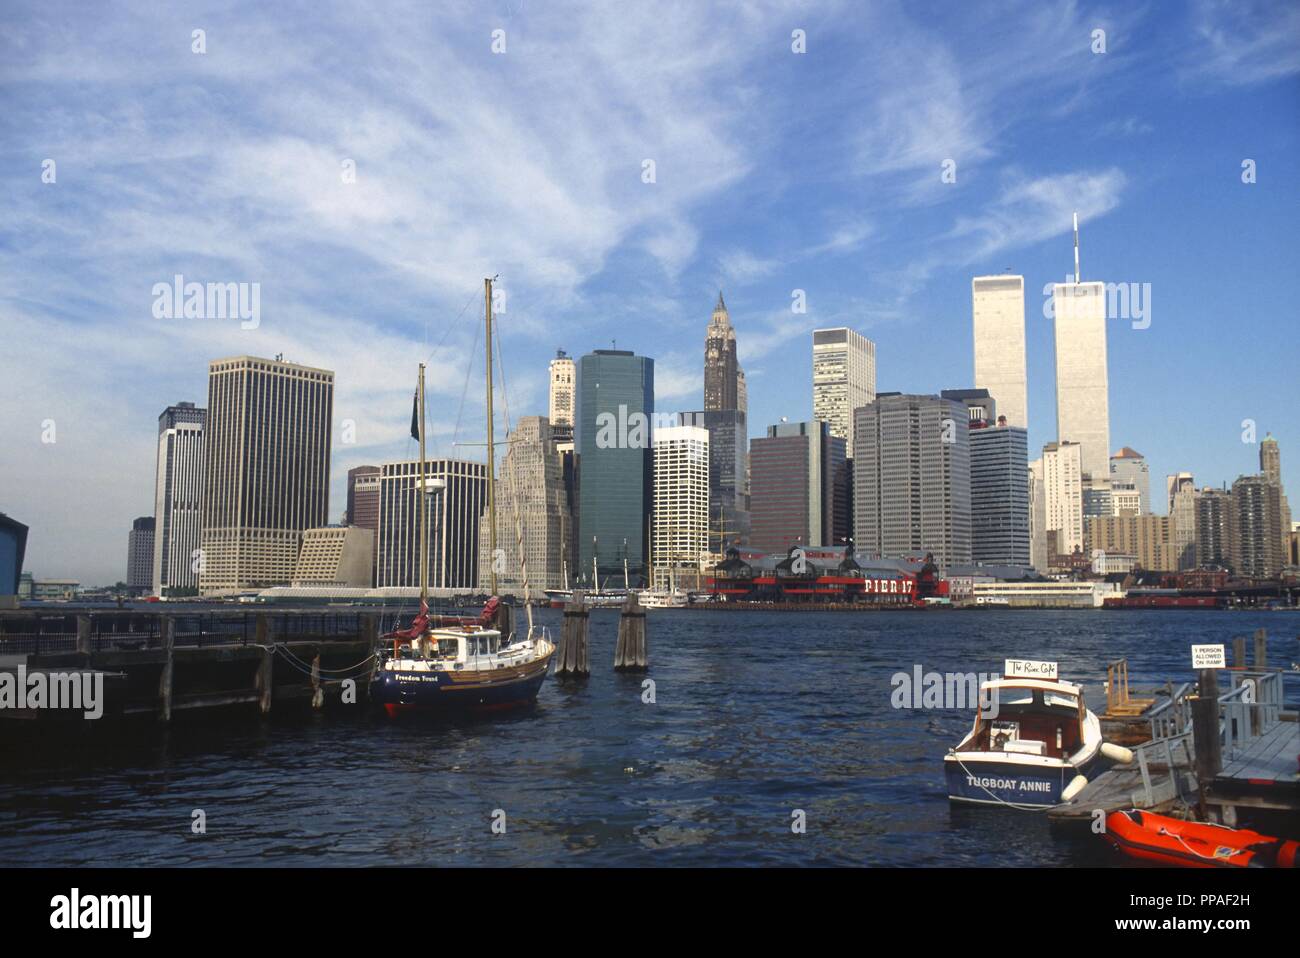 USA, New York city, the Manhattan skyline with World Trade Center Twin Towers in 1985 Stock Photo